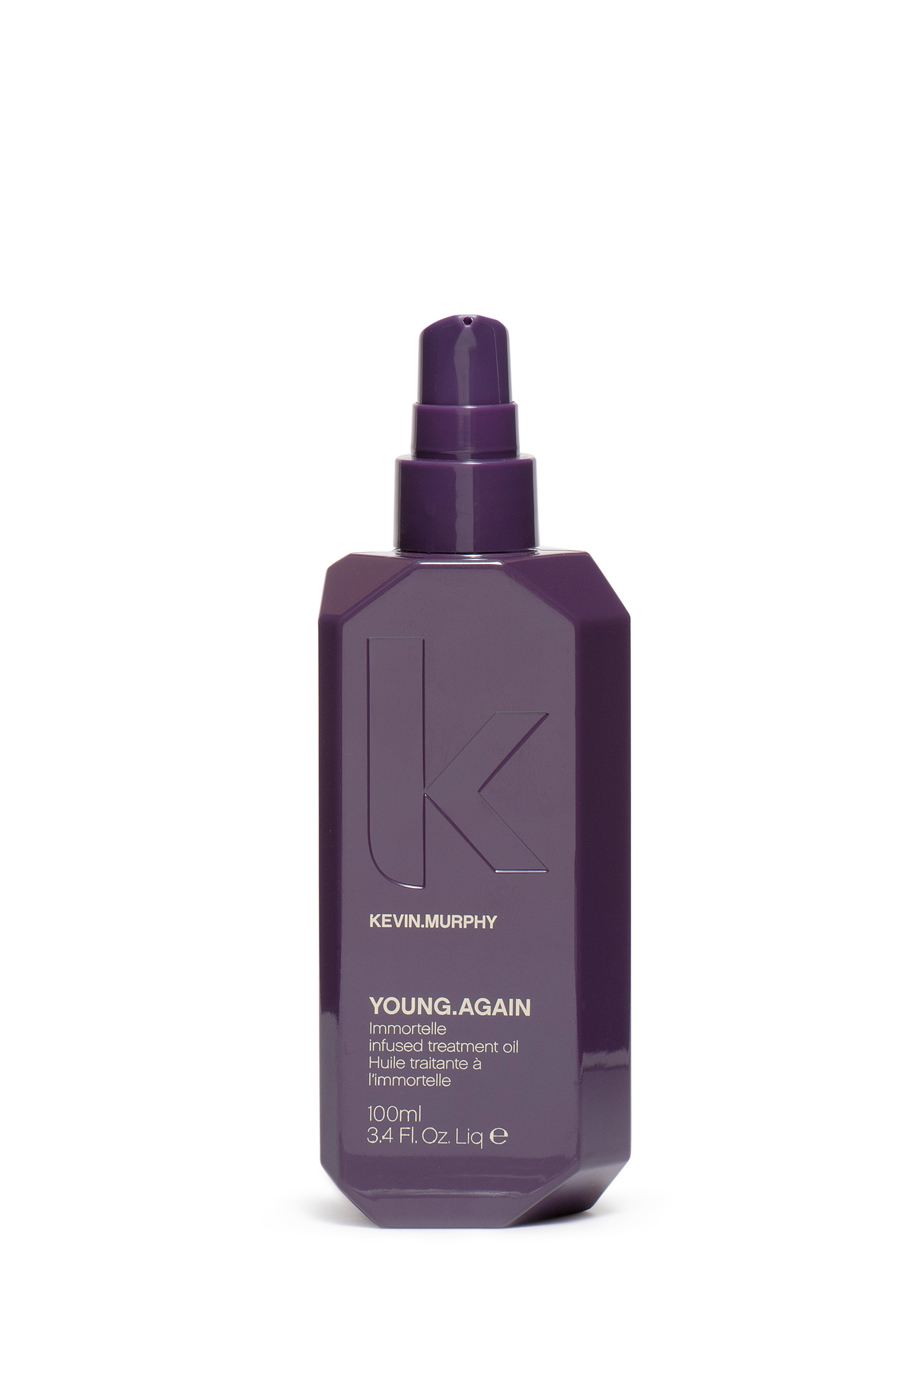 Kevin.Murphy Young.Again